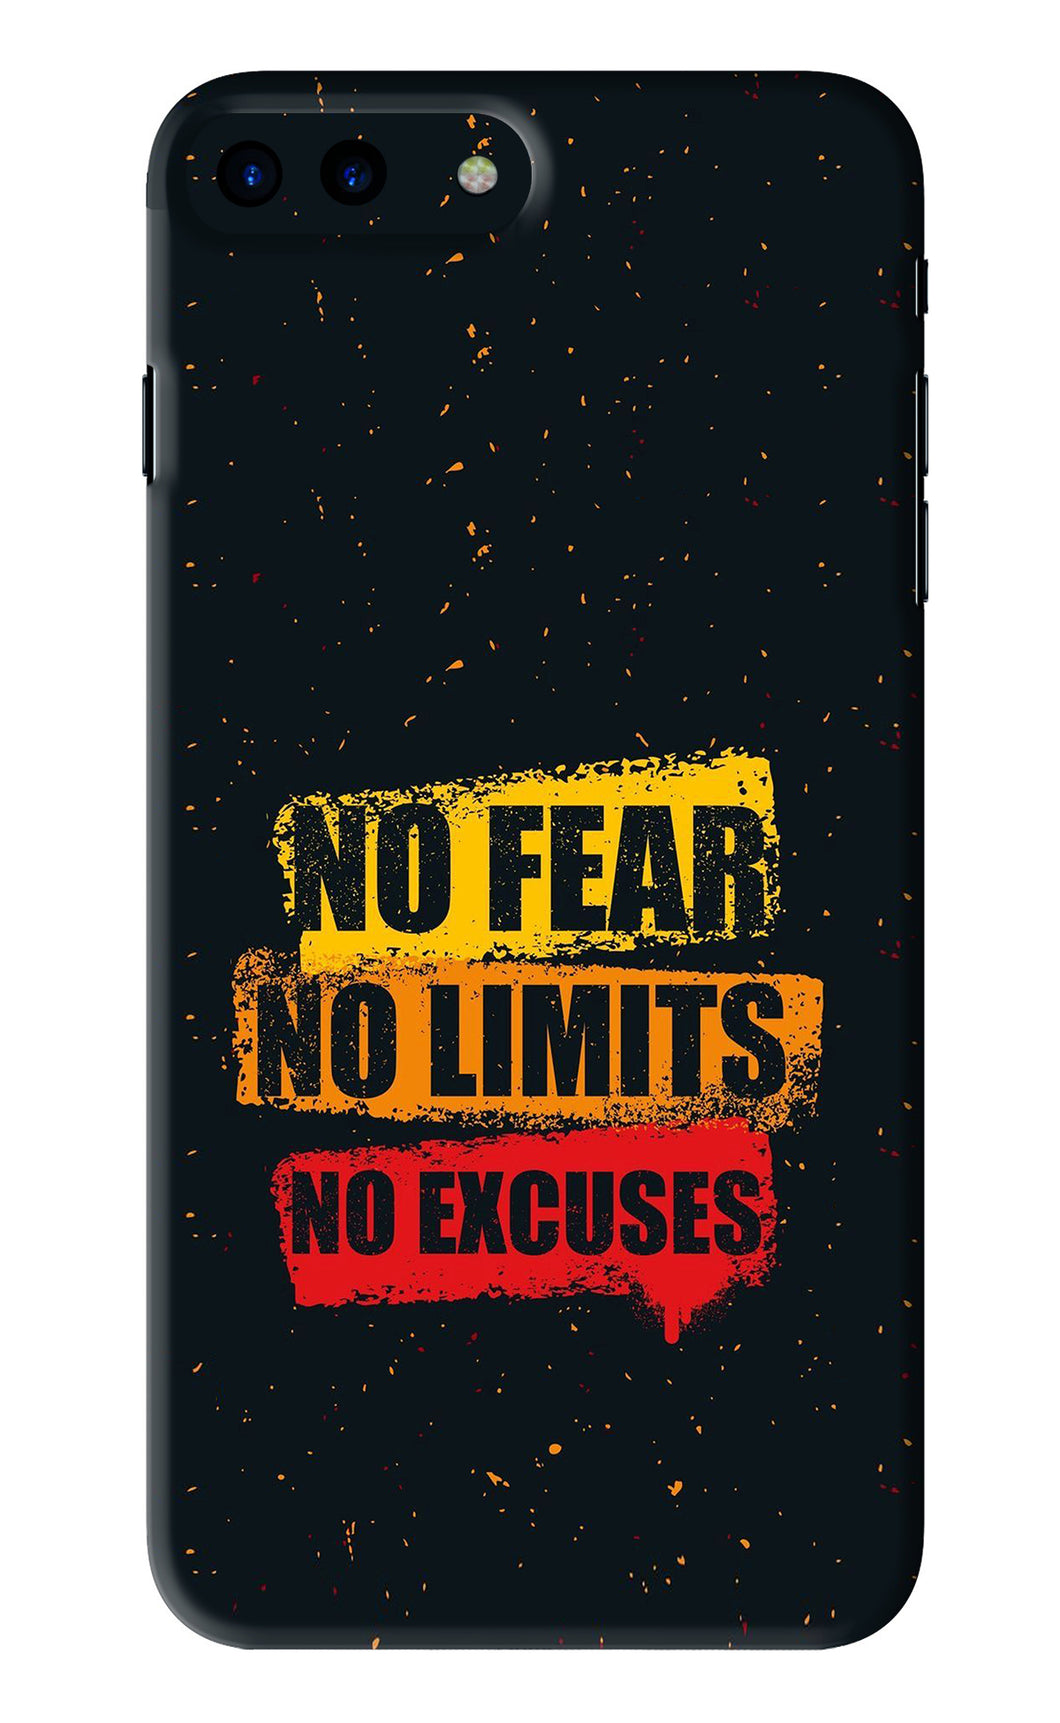 No Fear No Limits No Excuses iPhone 7 Plus Back Skin Wrap